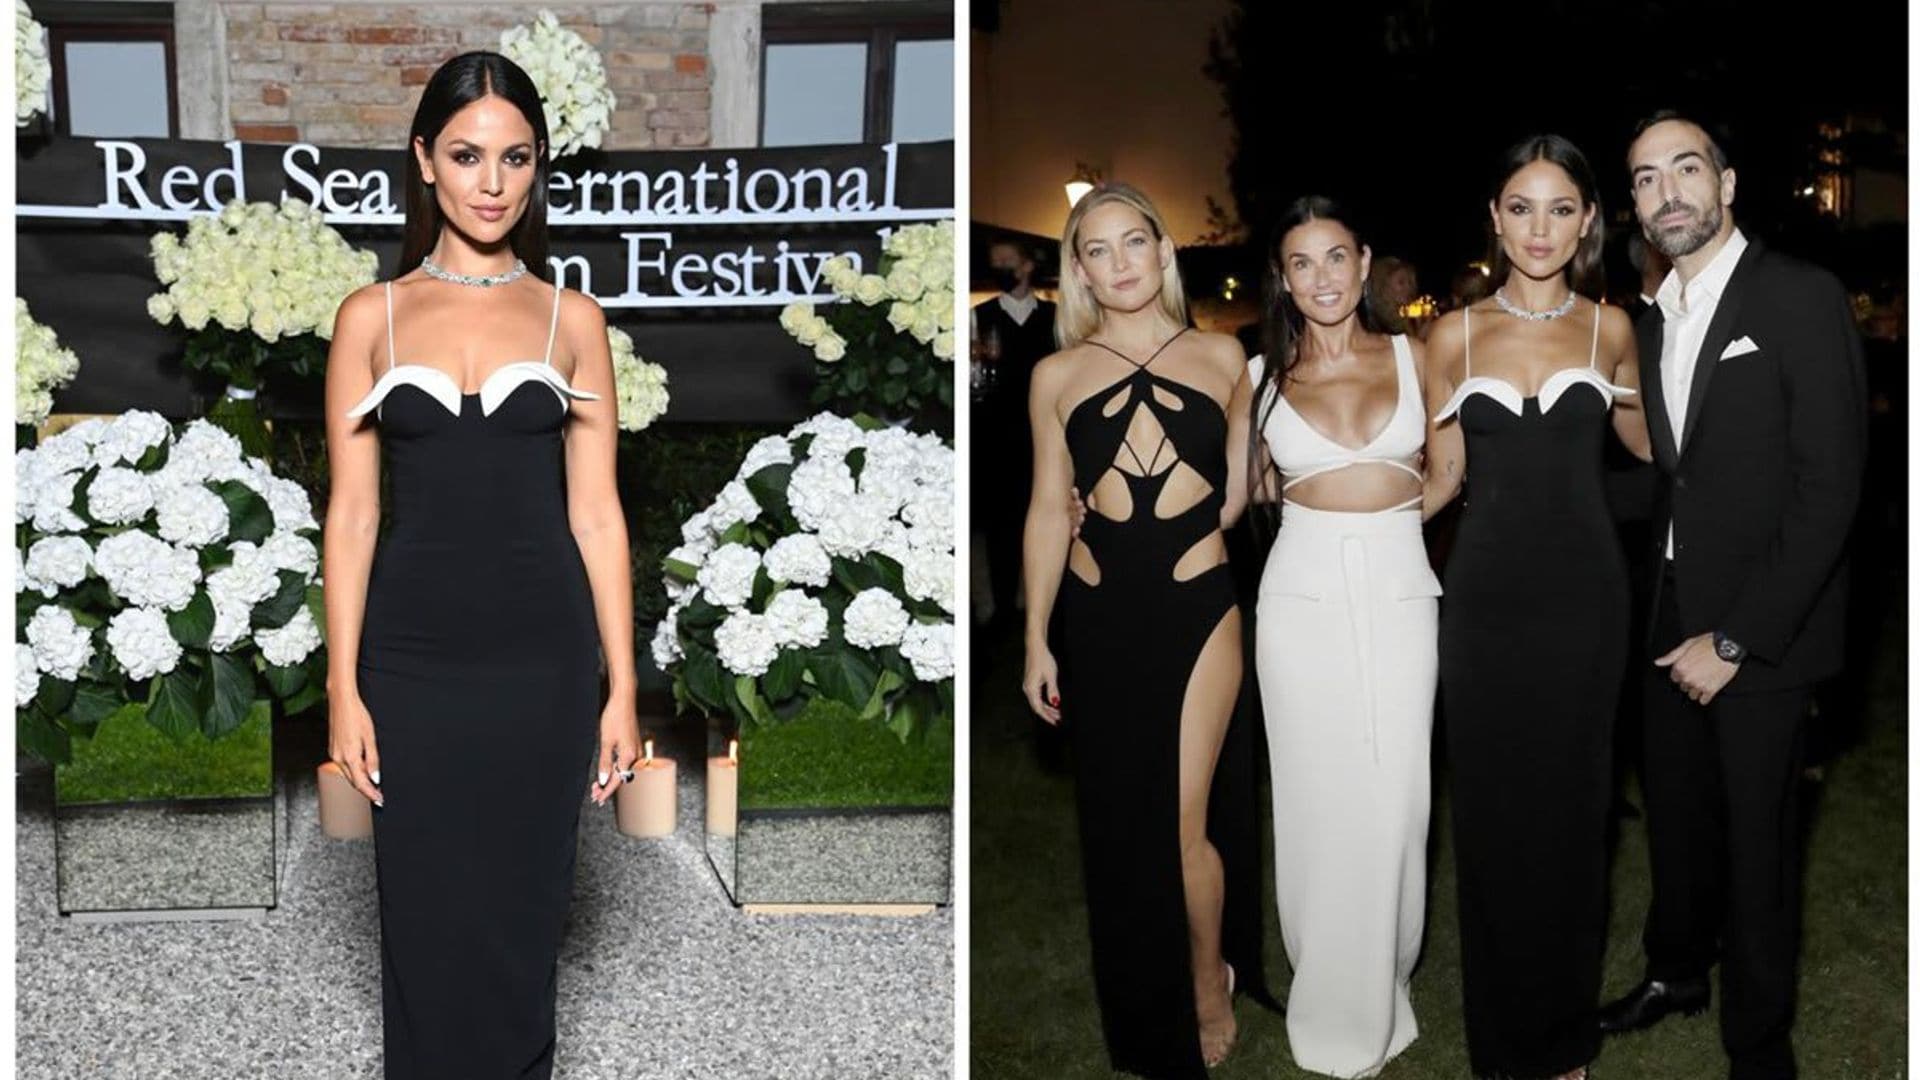 A stunning Eiza Gonzalez celebrating with Demi Moore and Kate Hudson at the Women in Cinema Gala in Venice